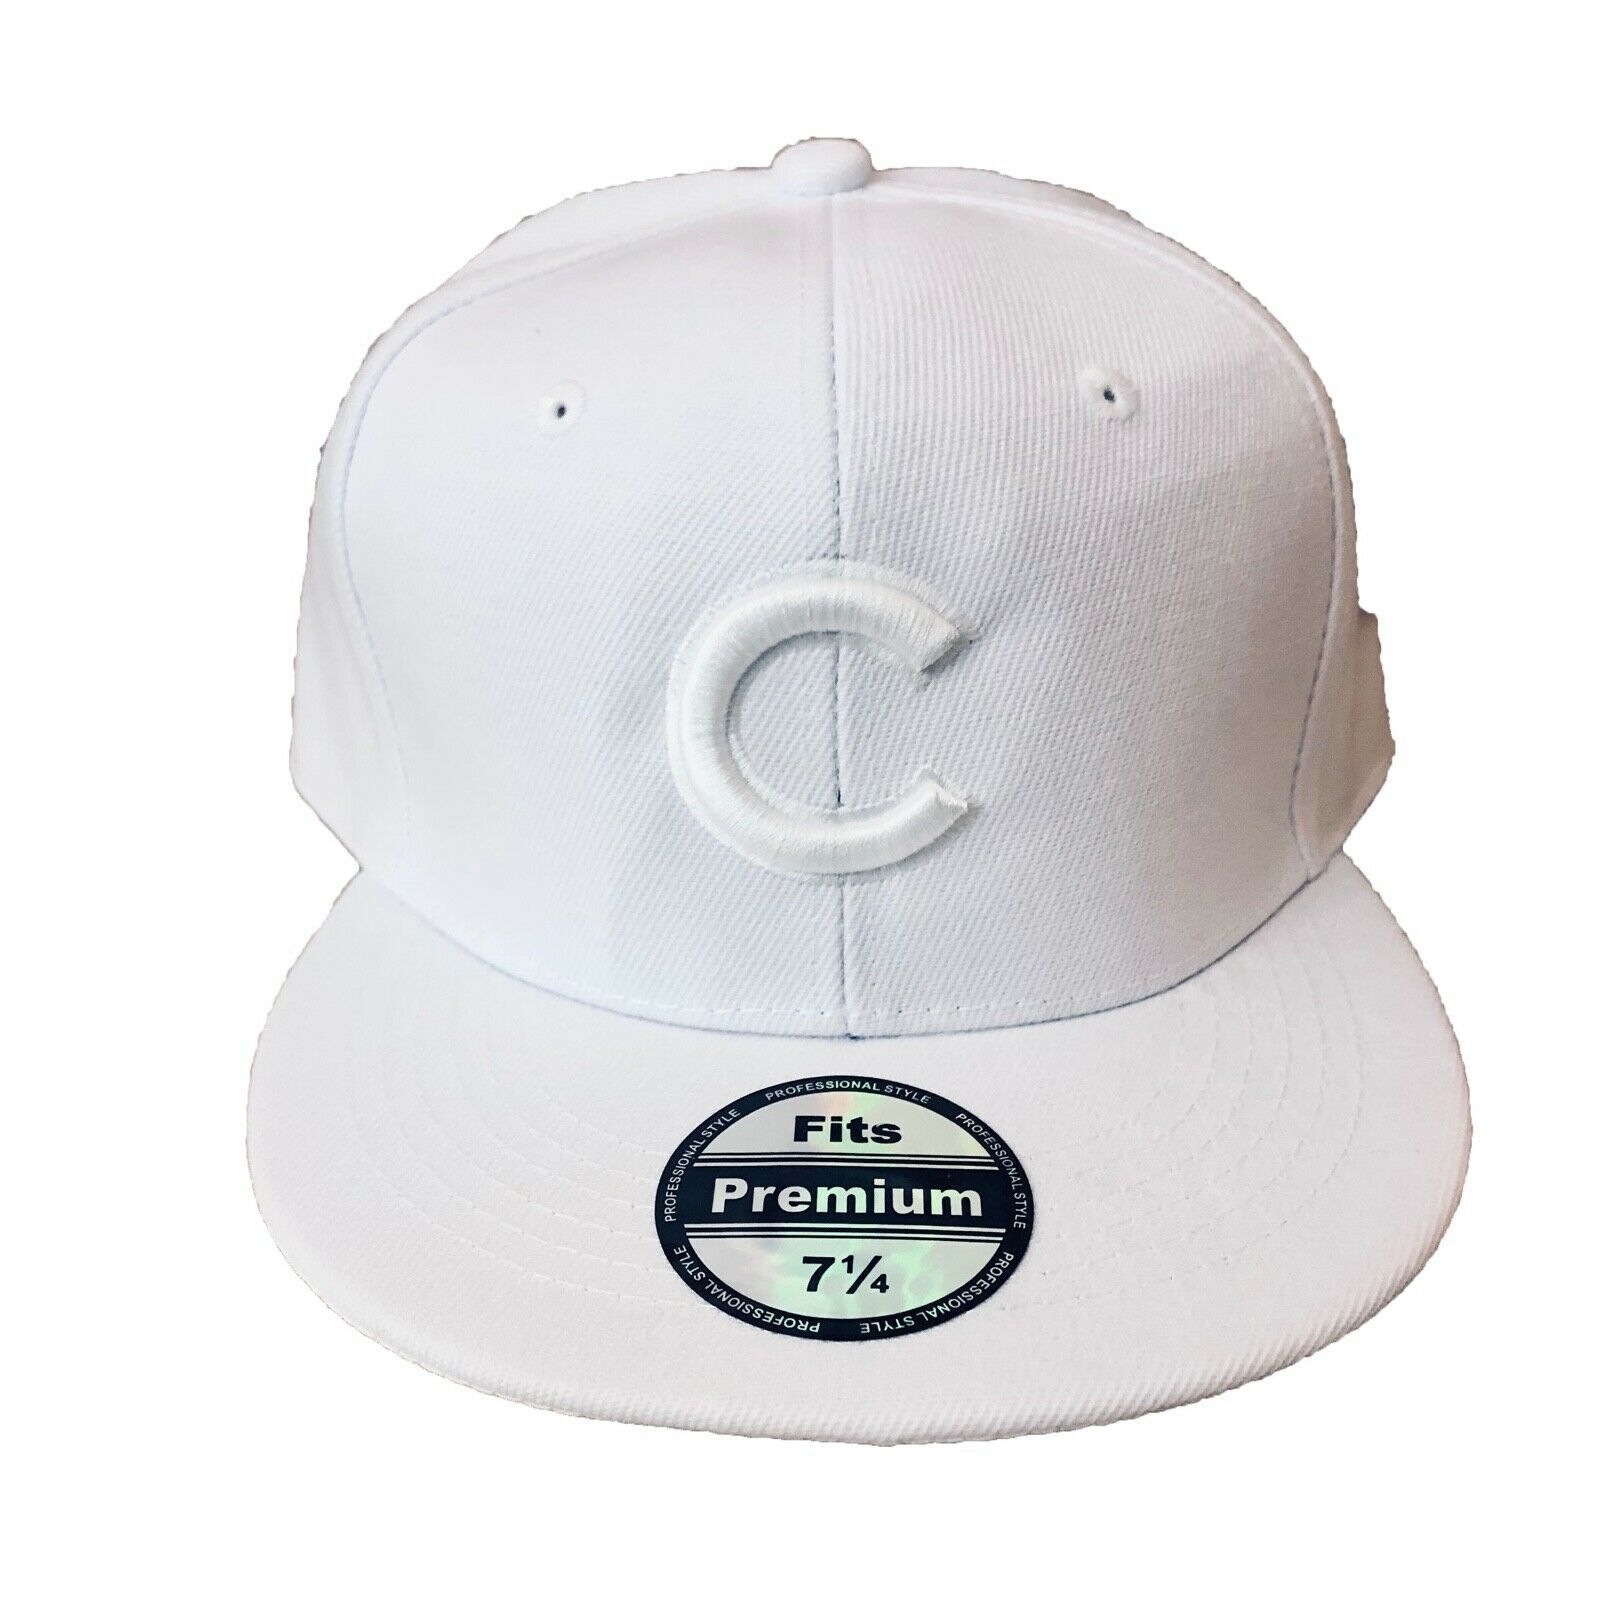 NEW Mens Chicago Cubs Baseball Cap Fitted Hat Multi Size White